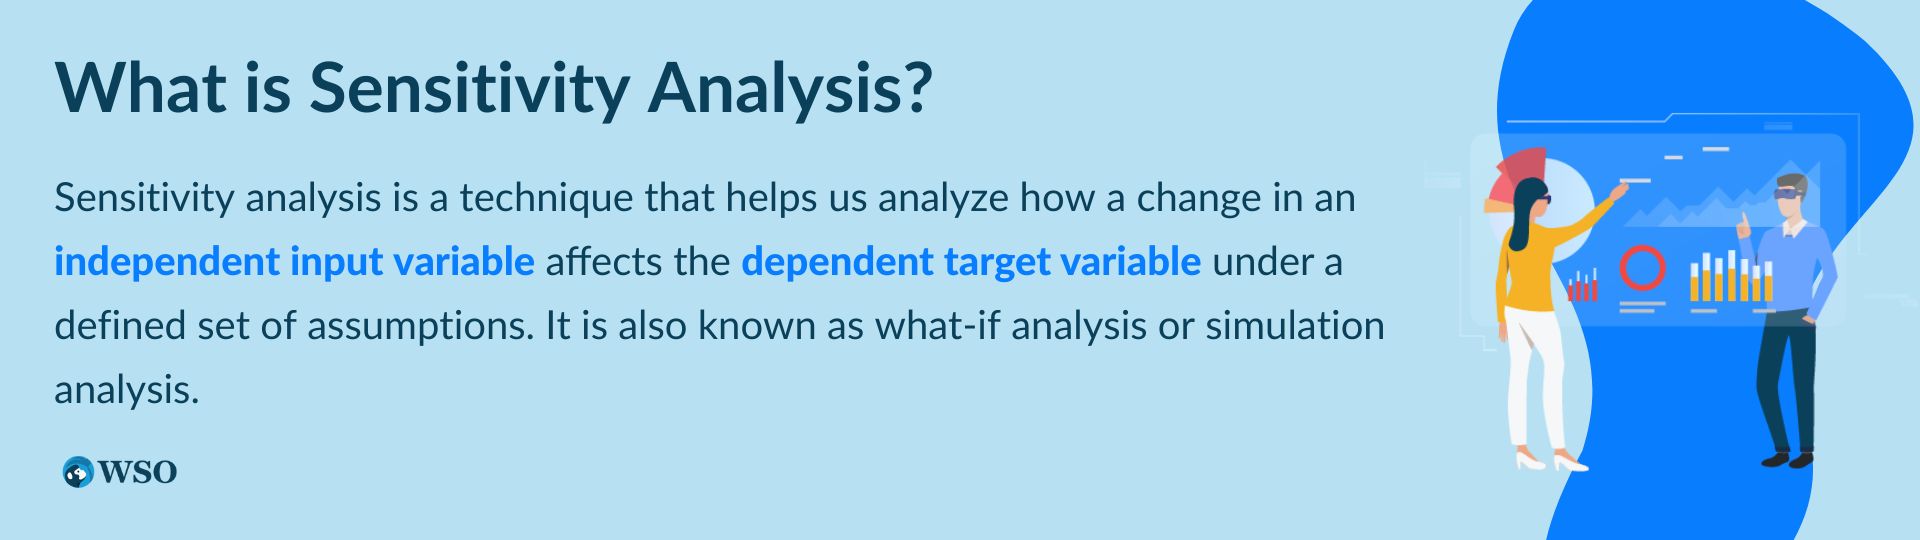 What is Sensitivity Analysis?